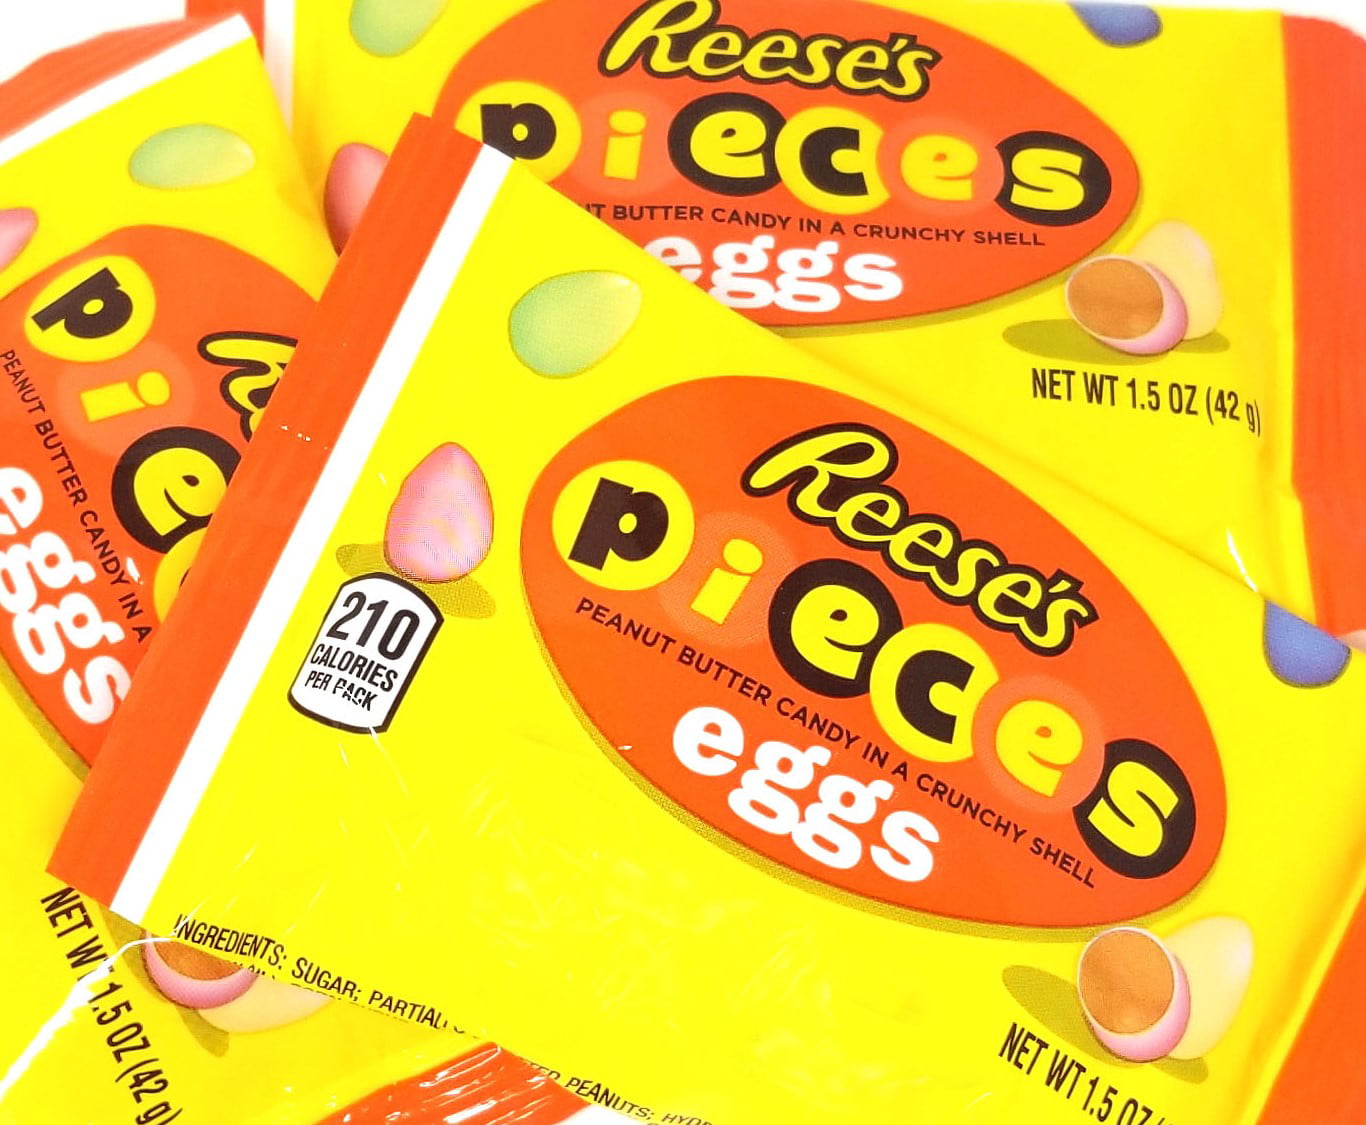 Reese's Pieces Peanut Butter Crunchy Shell Pastel Eggs Candy, 1.5-Ounce